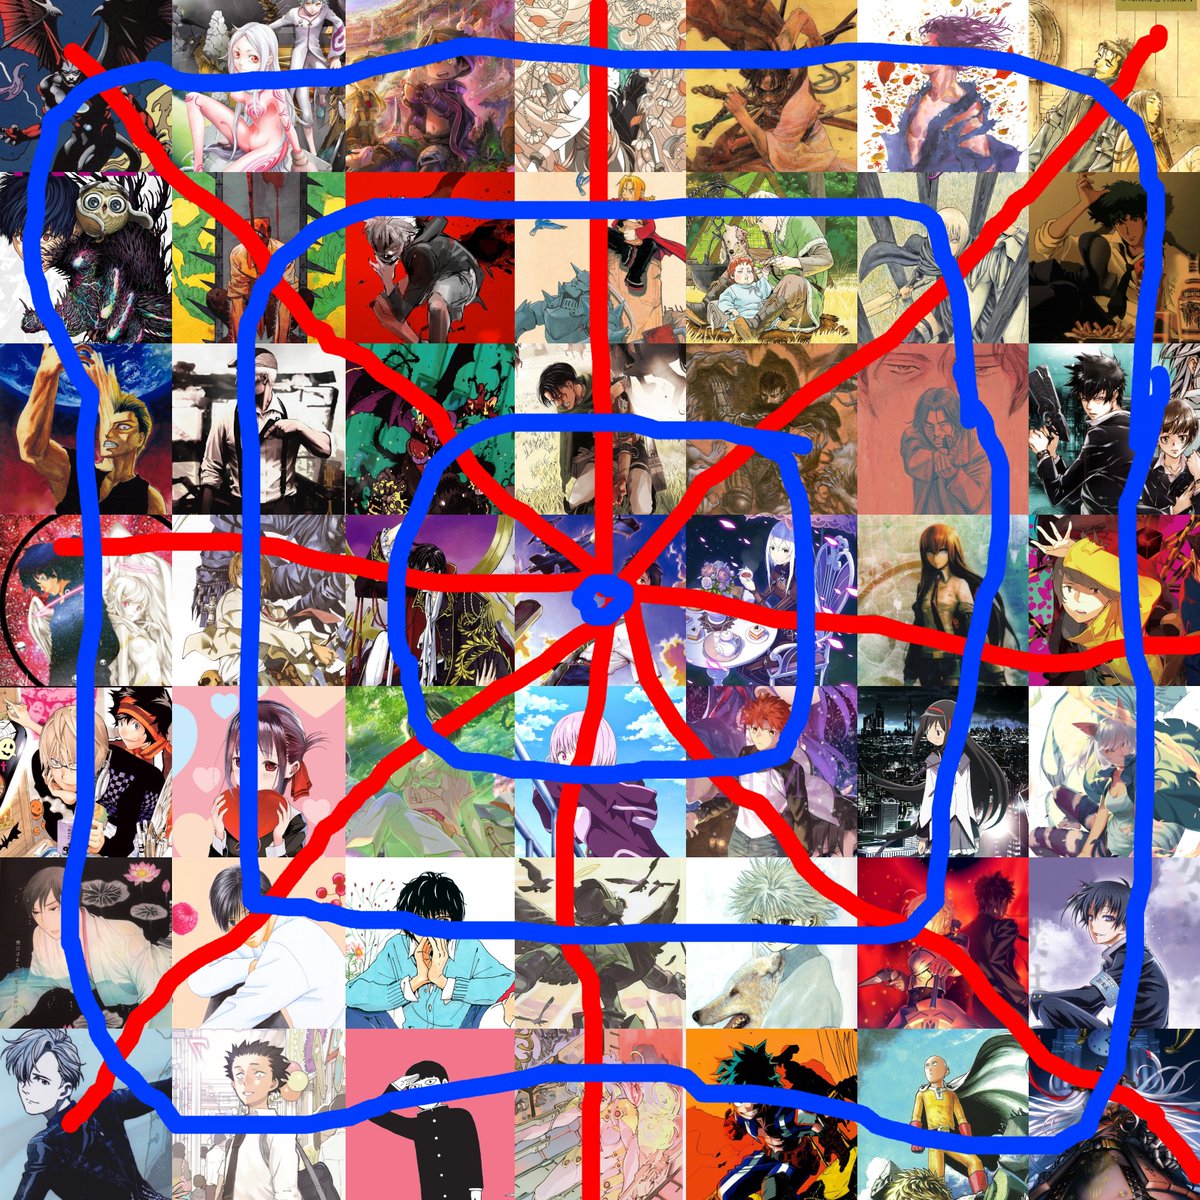 The layout goes kinda like this. The red lines are the trajectory the placement goes outwards from the middle, so things on the same line will be more directly connected, and what's between the lines connect to those. The blue is for how close (literally) they are to Eva.